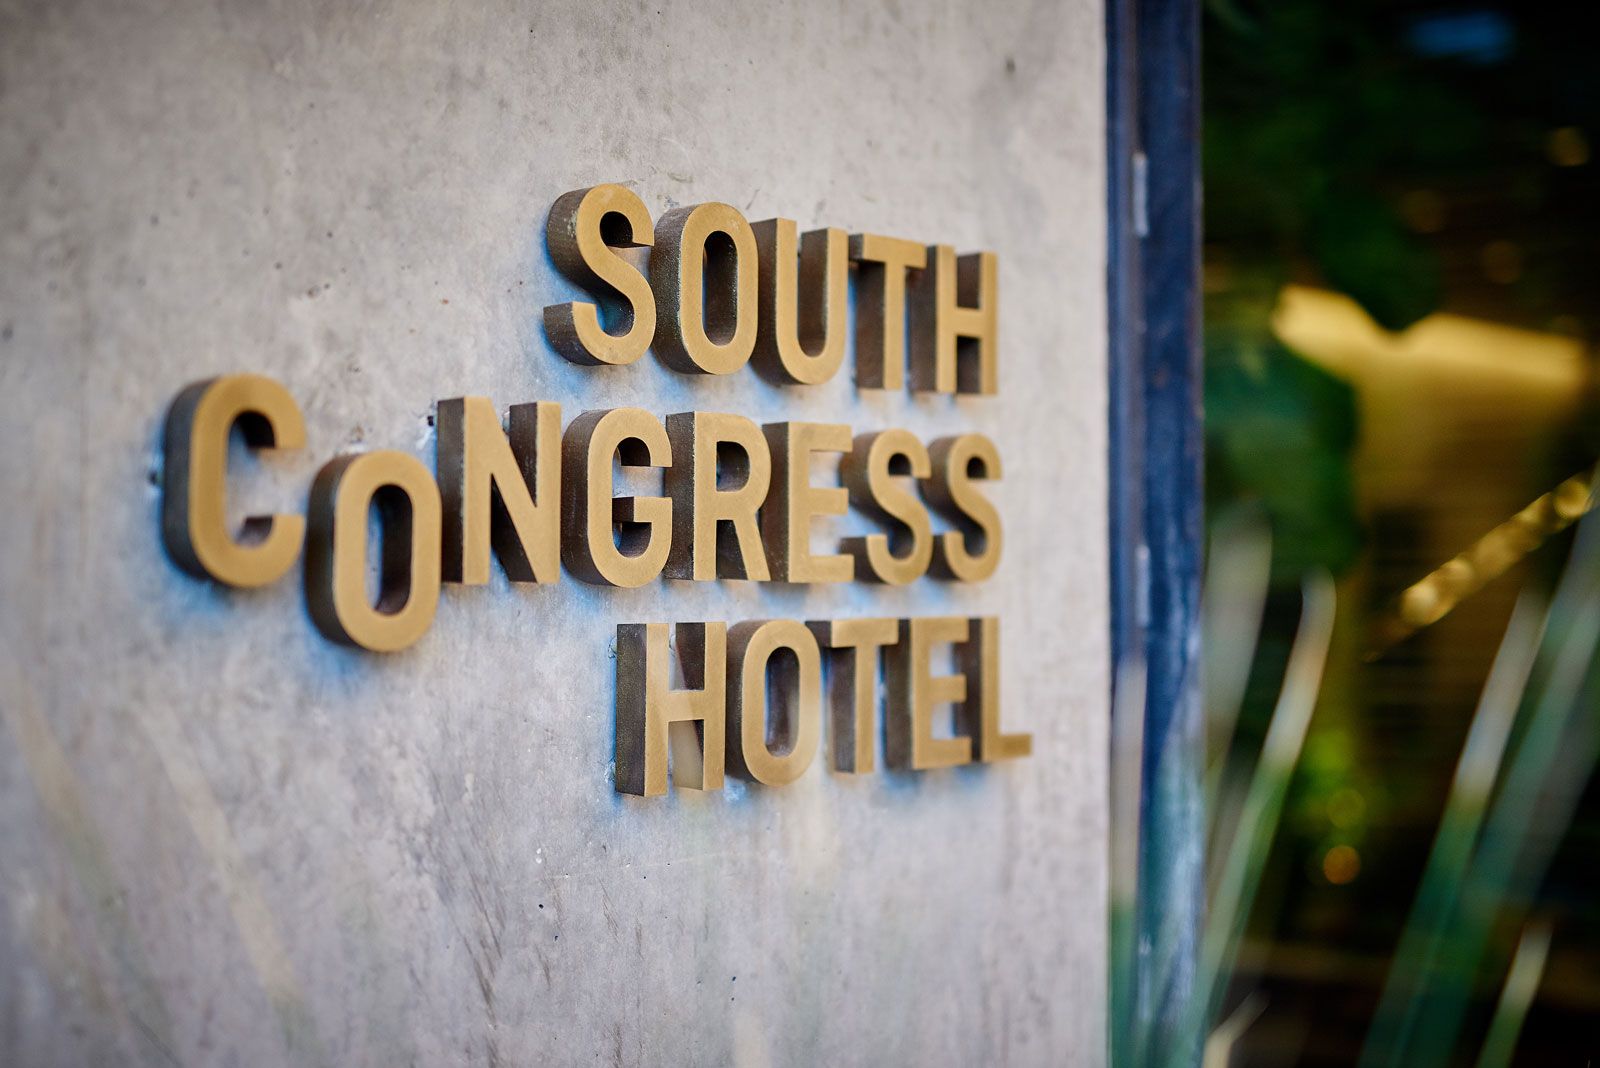 South Congress Hotel sign